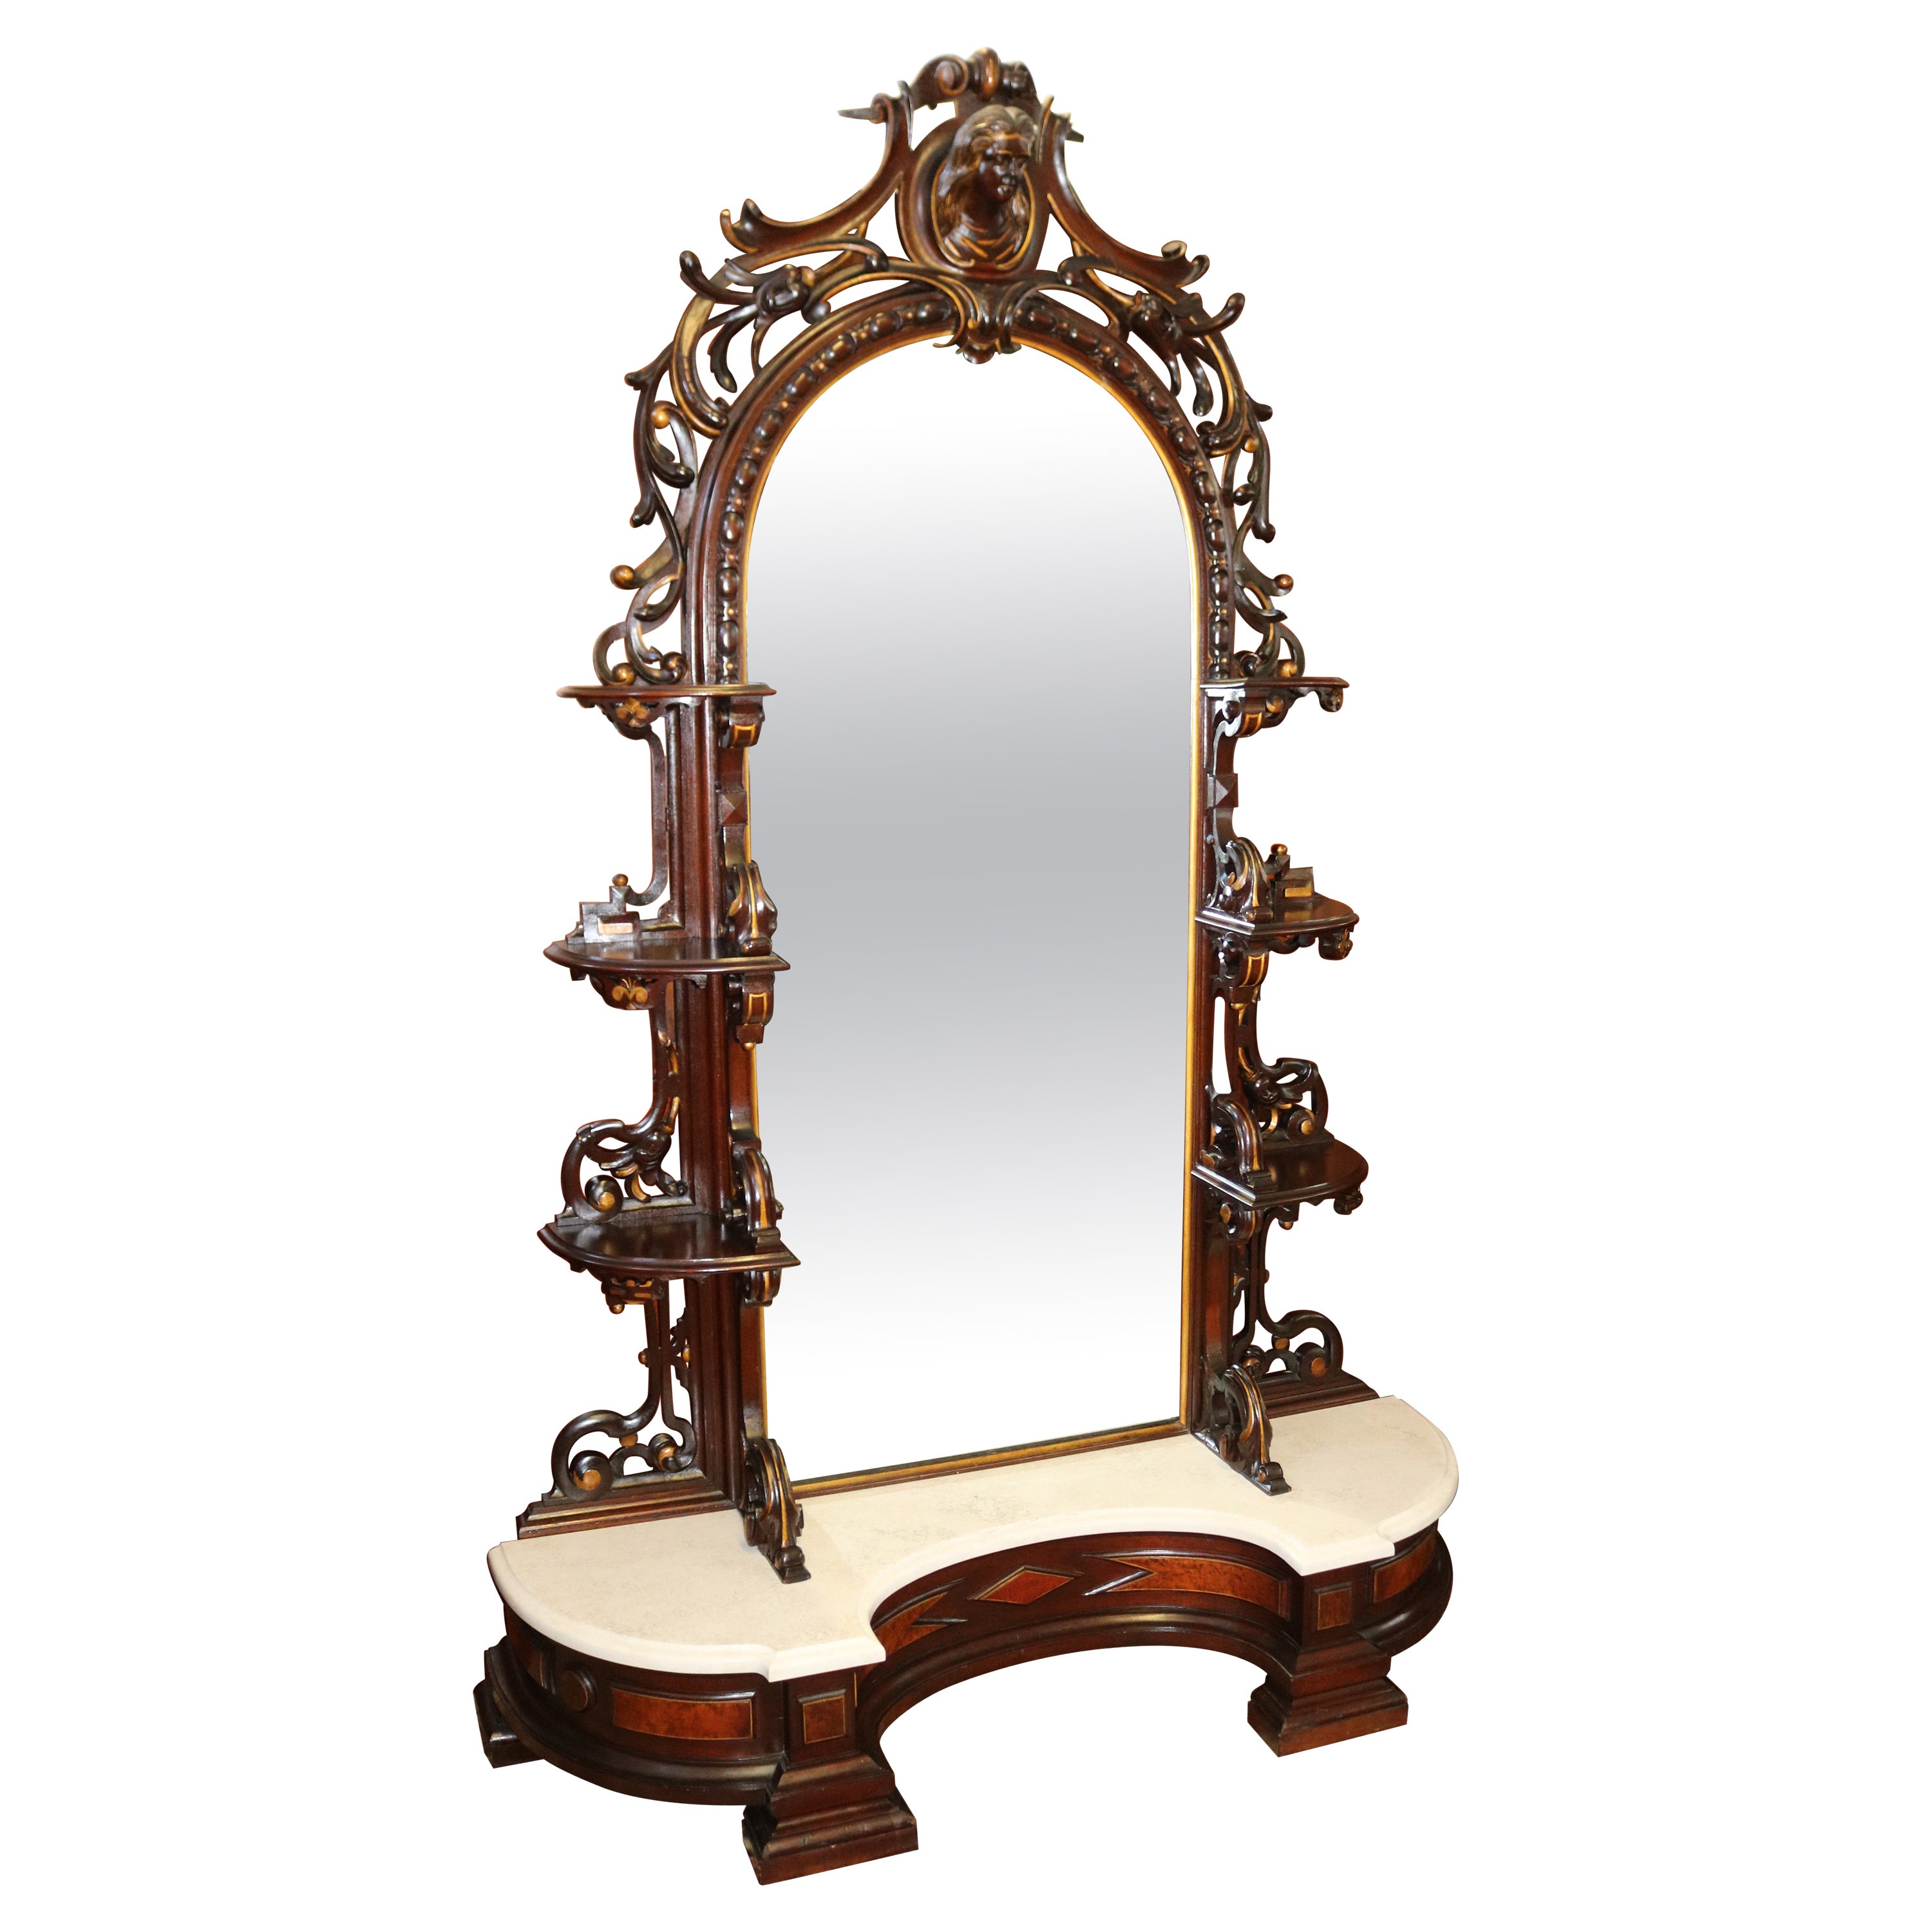 Rosewood Pier Mirrors and Console Mirrors